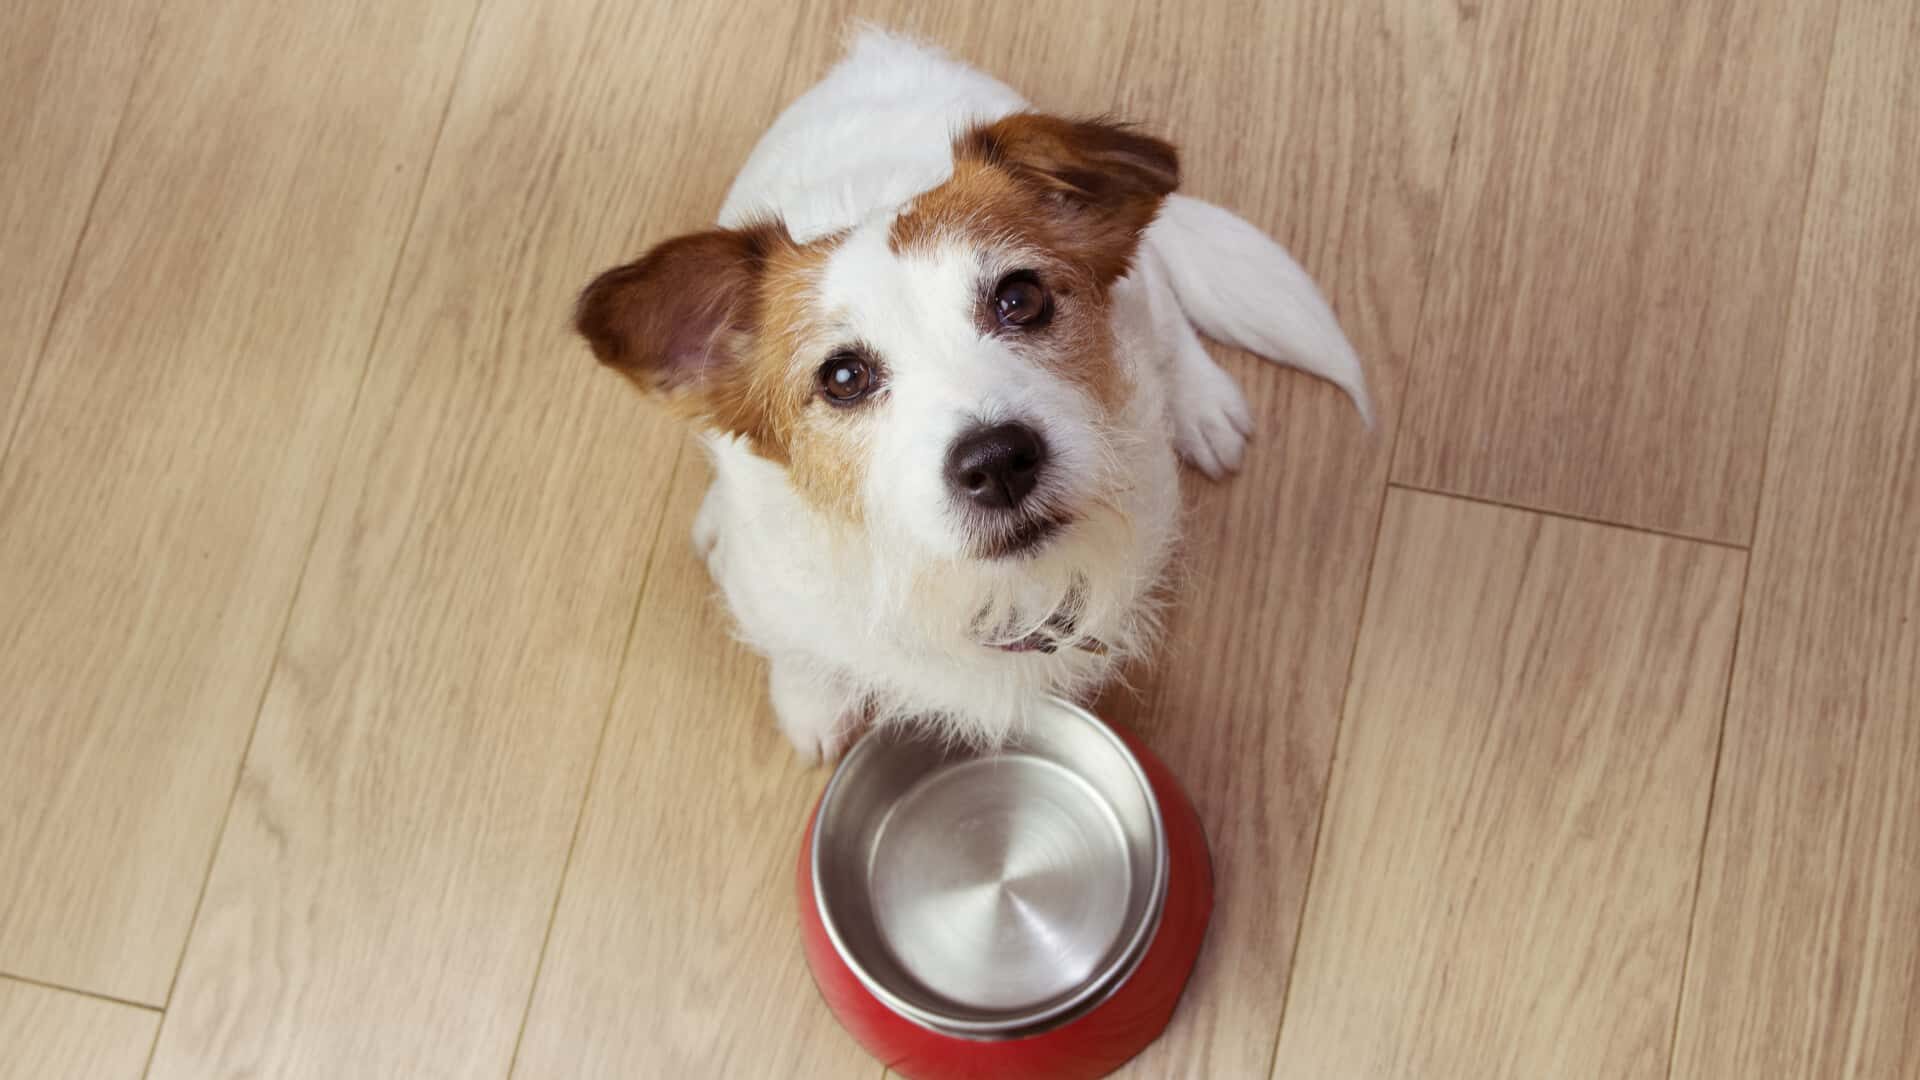 Top 20 Foods for Dogs with Sensitive Stomach: Guide